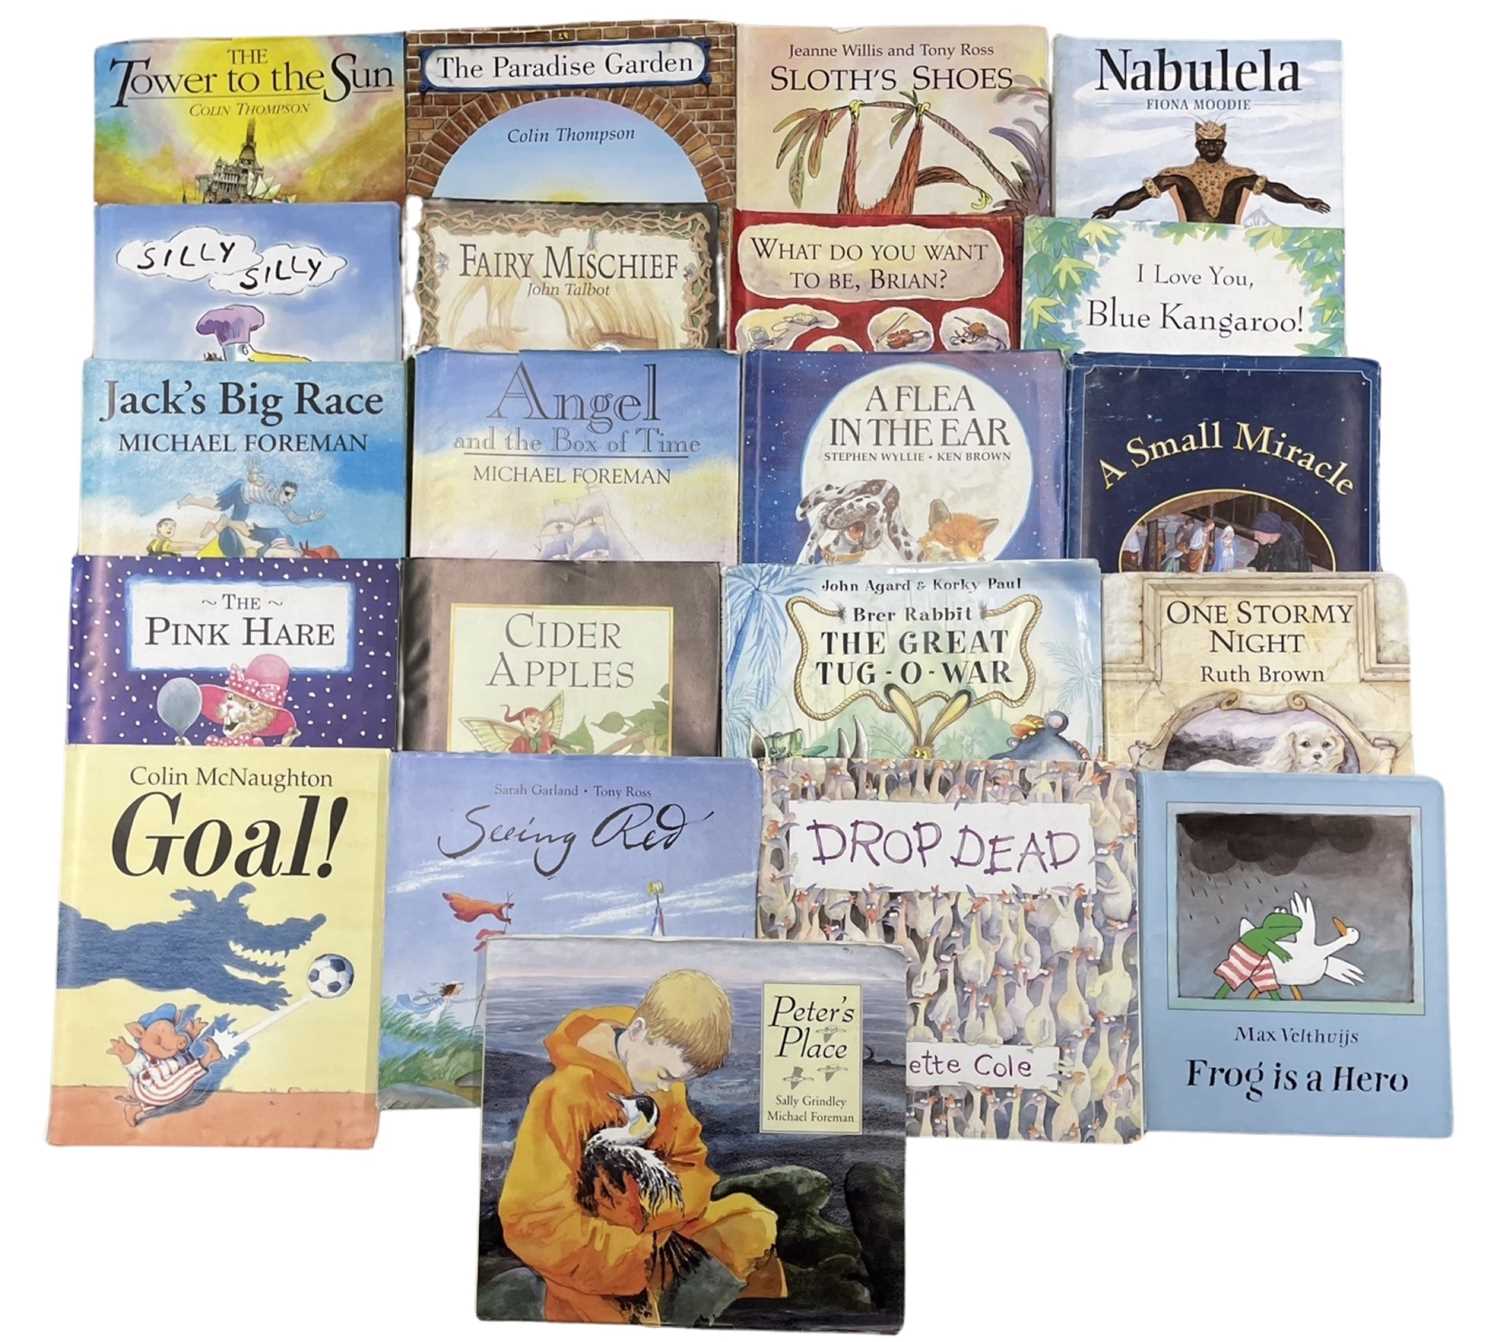 A quantity of proof-copies of various children's books